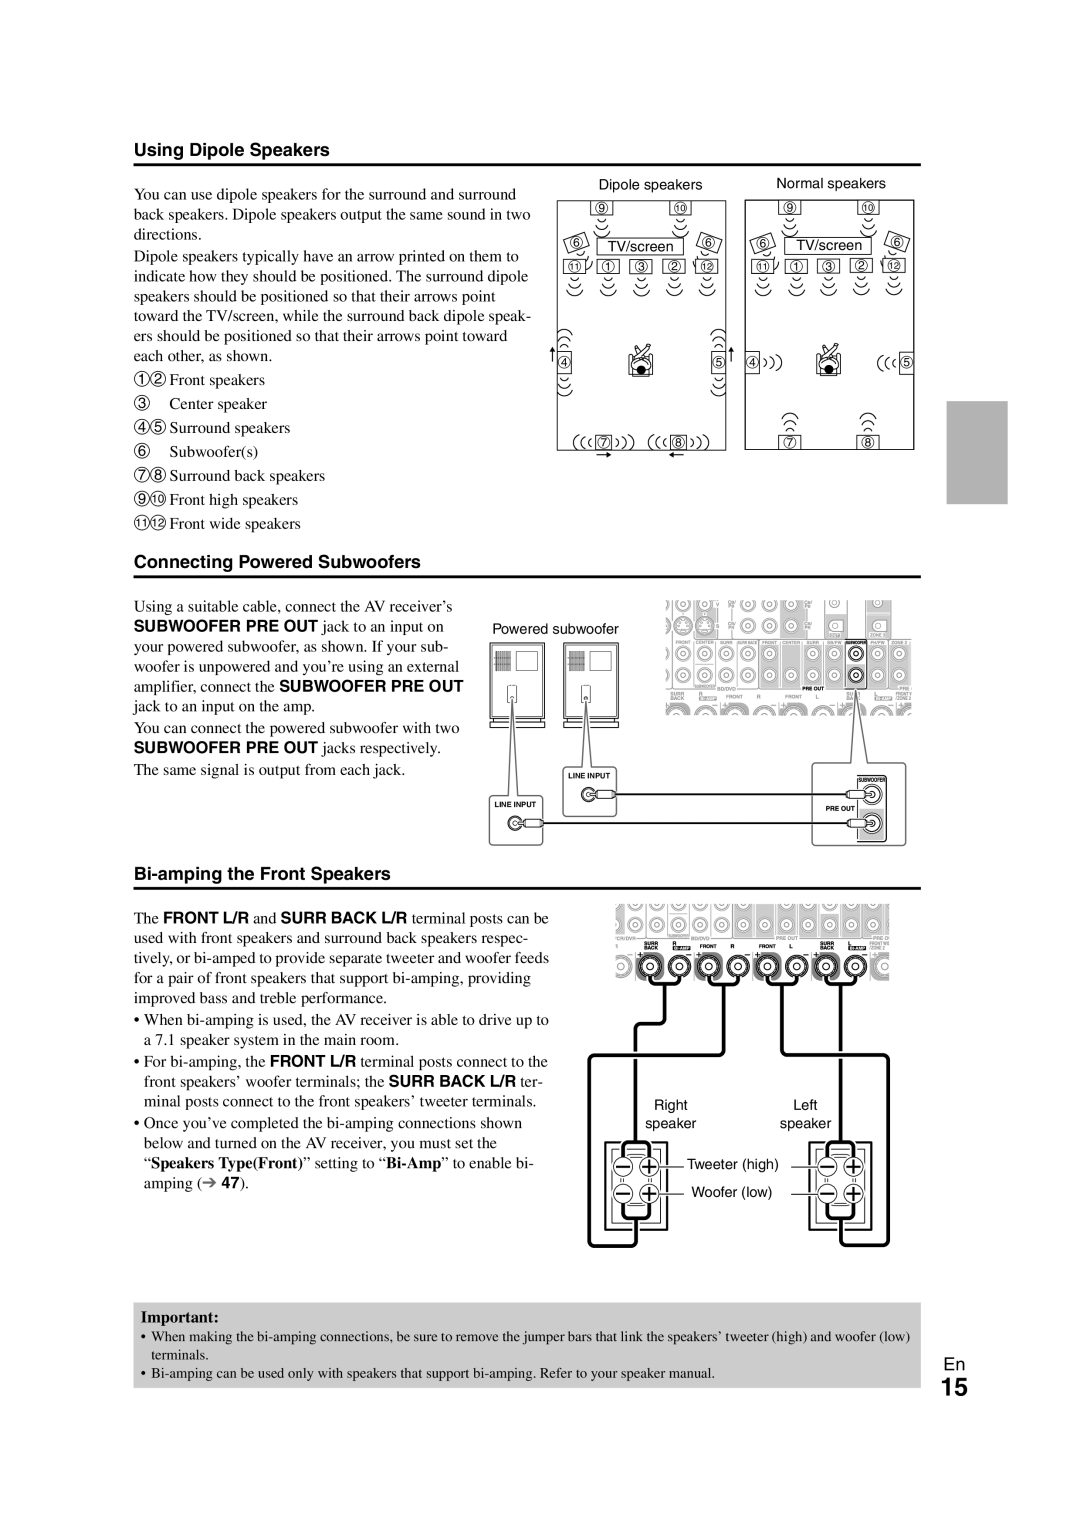 Onkyo TX-NR1008 instruction manual Using Dipole Speakers, Connecting Powered Subwoofers, Bi-ampingthe Front Speakers 